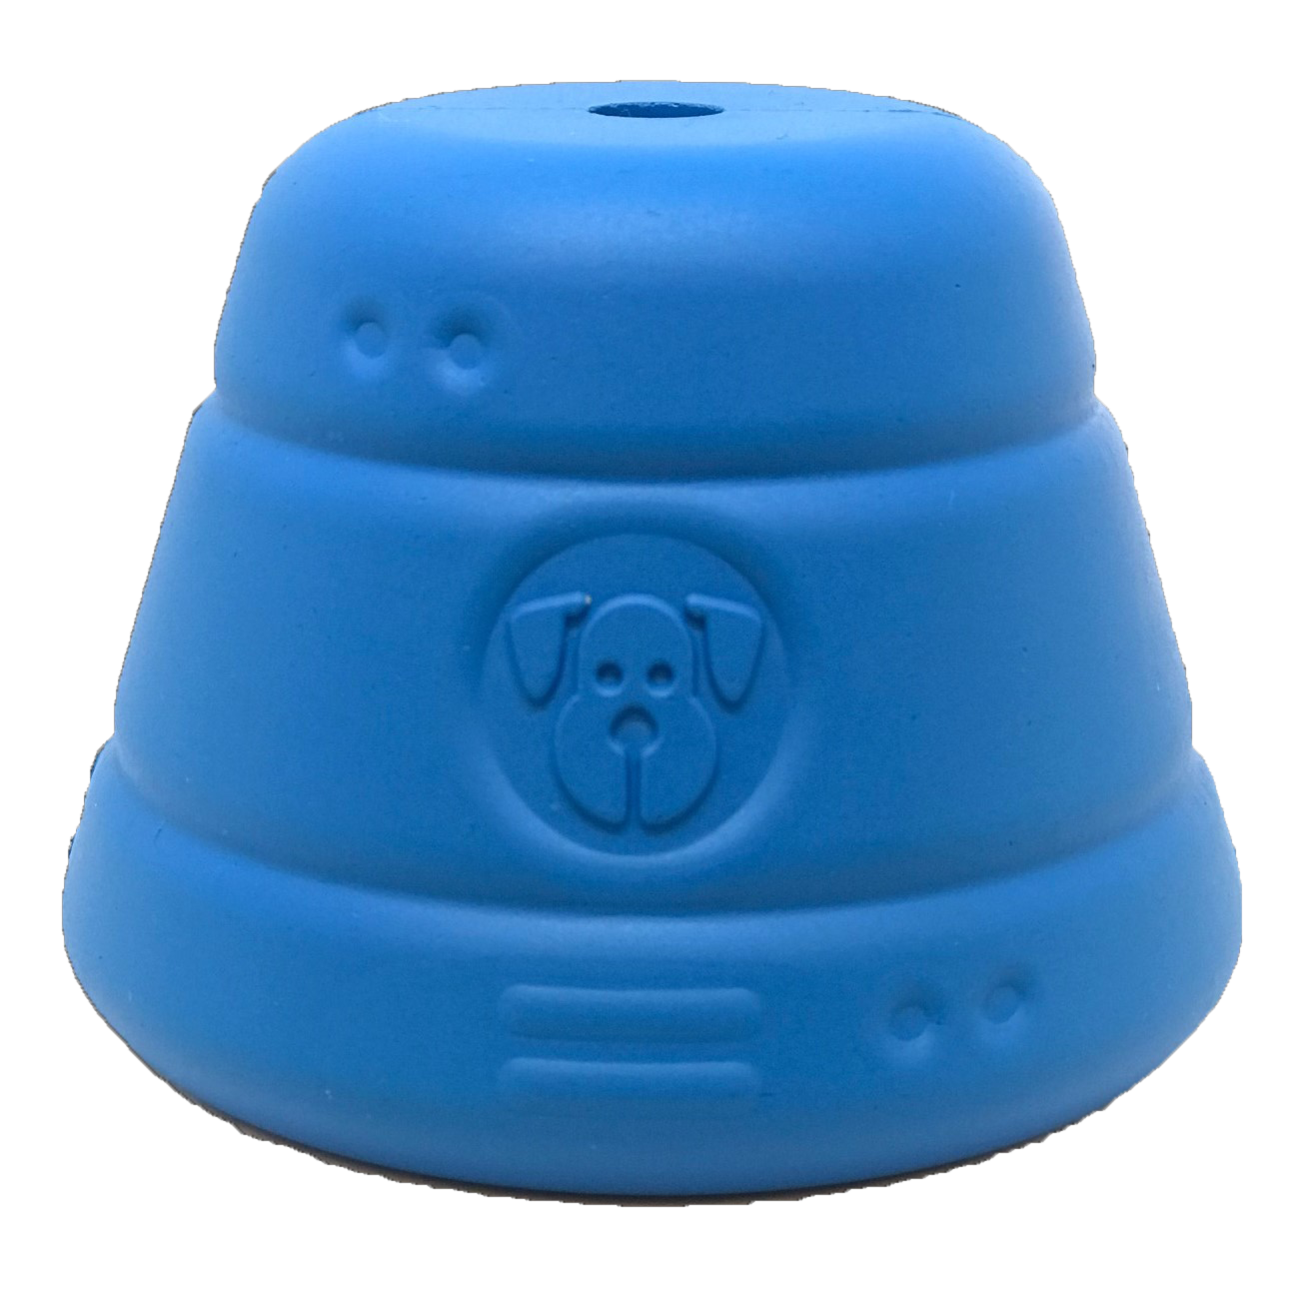 Enrichment Dog Toy Space Capsule from Rover Pet Products and Sodapup Dog Toys